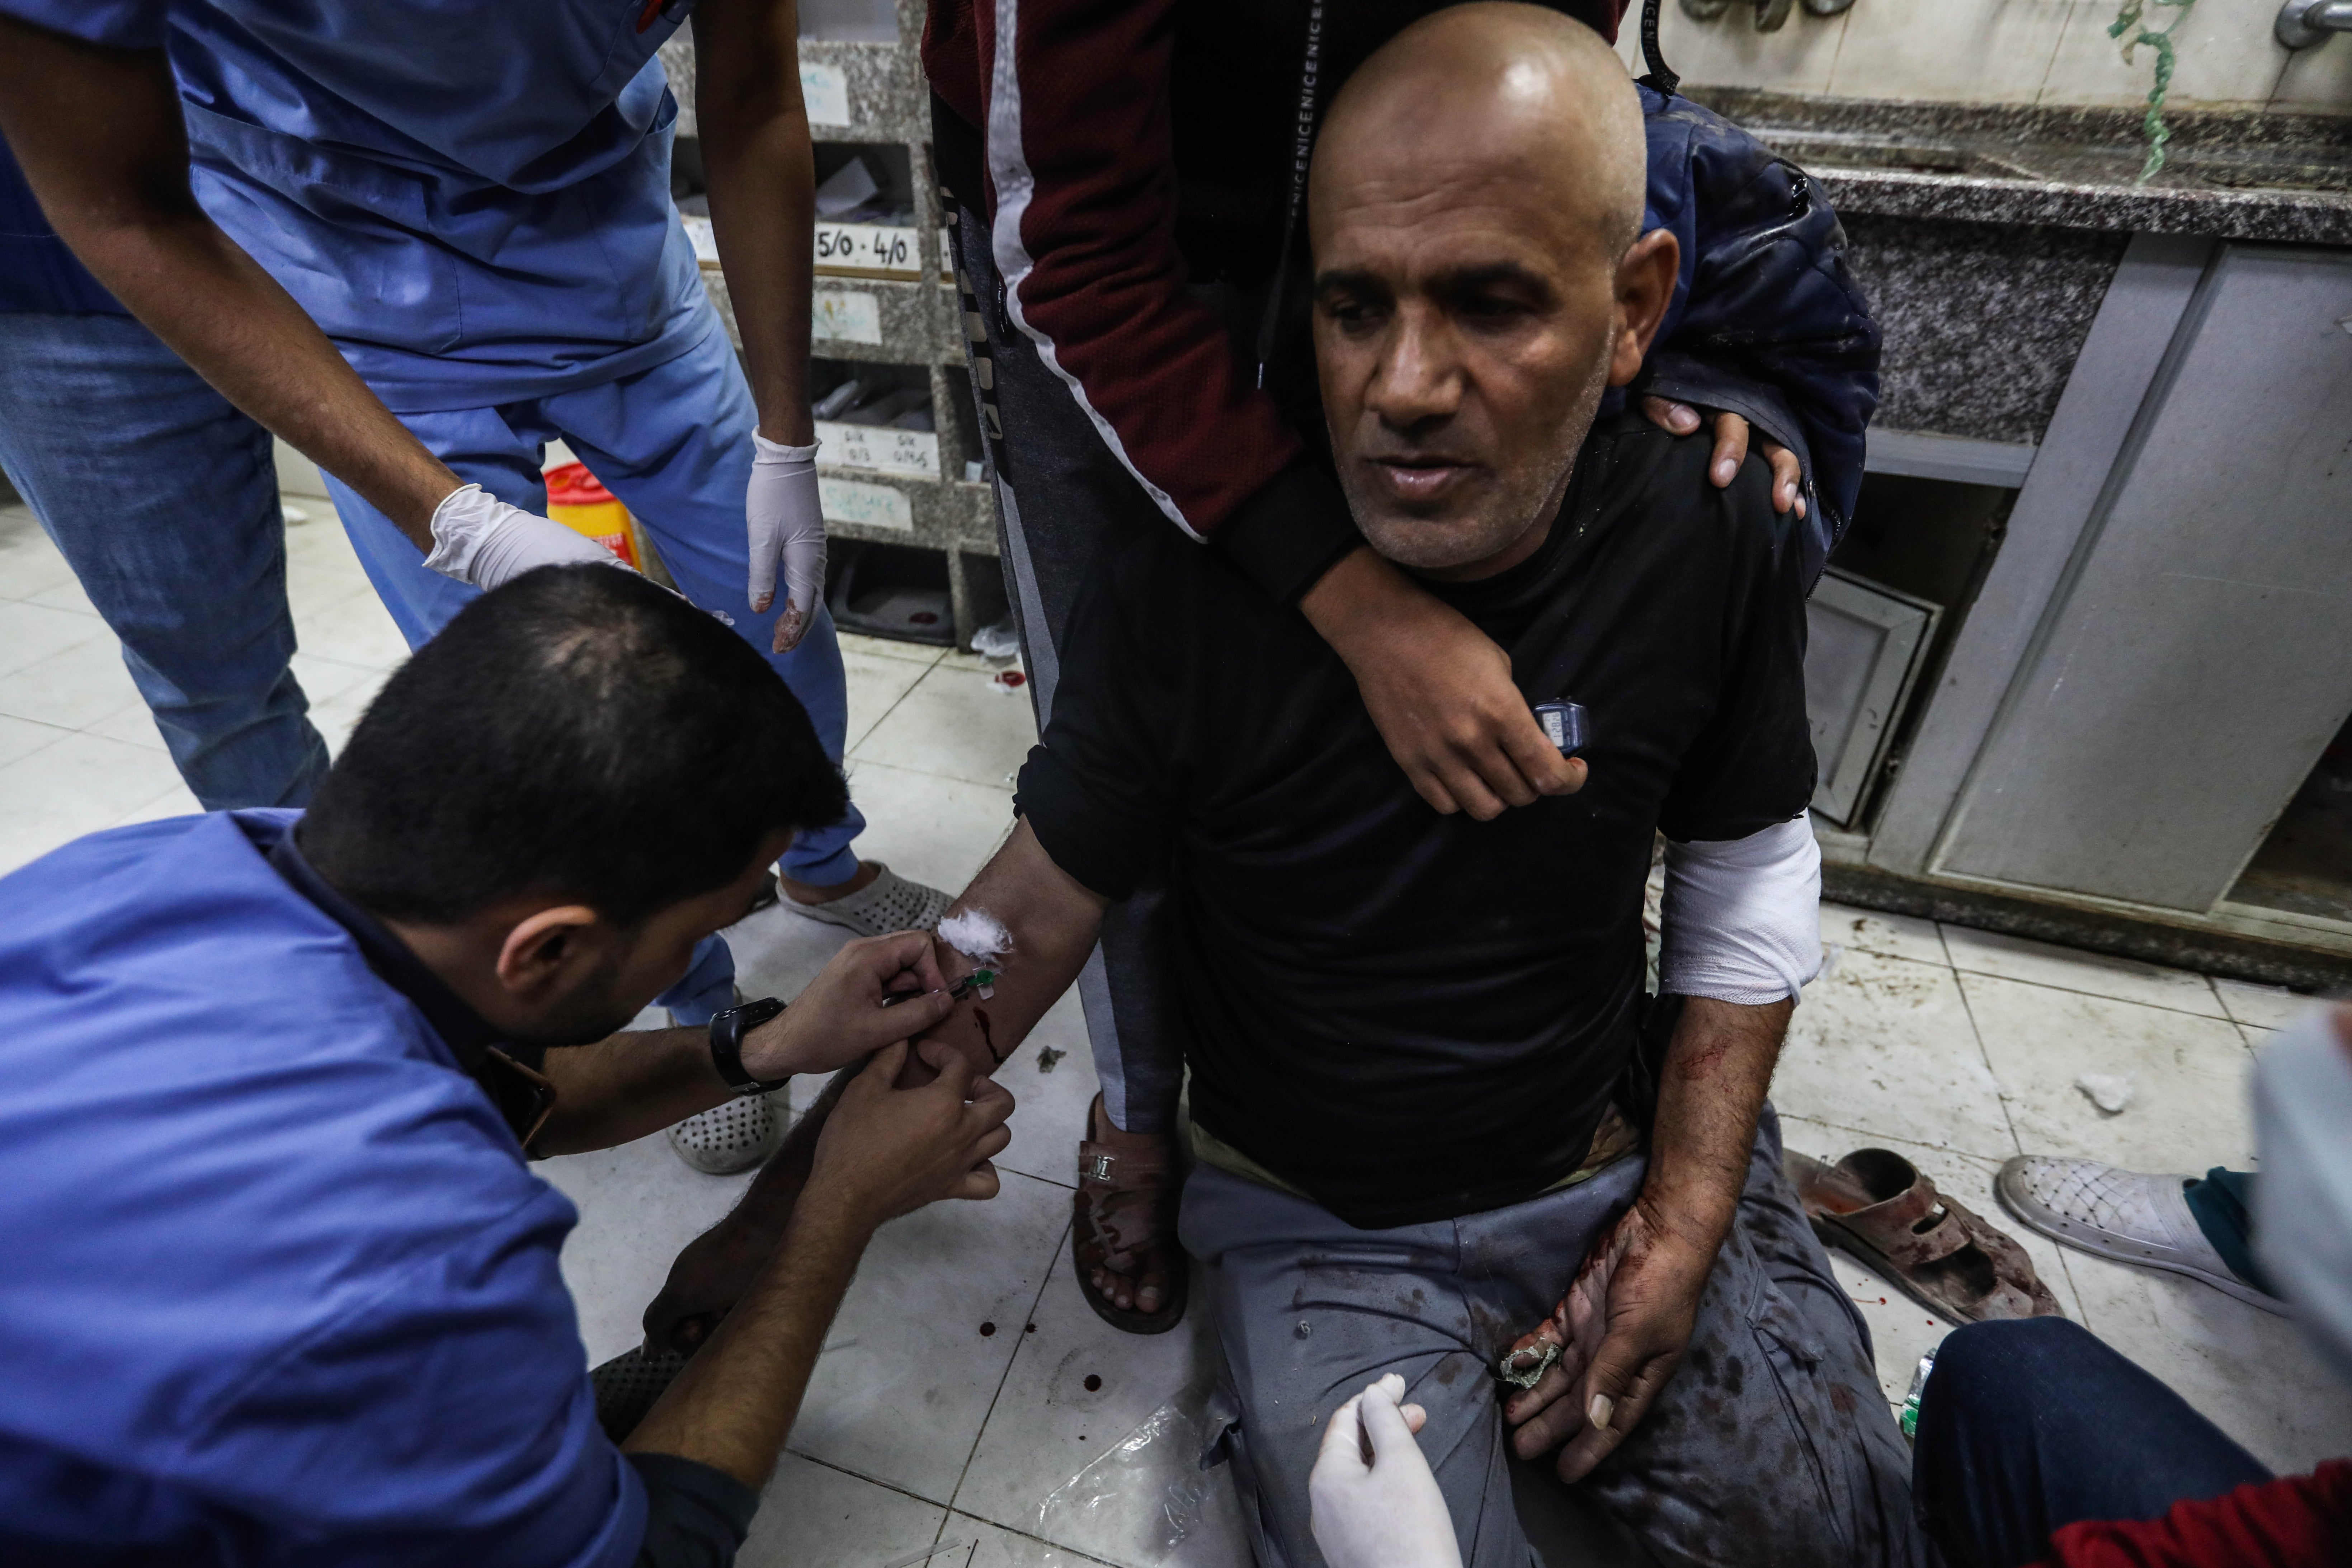 Nasser Hospital in Khan Younis has been treating dozens of Palestinians daily